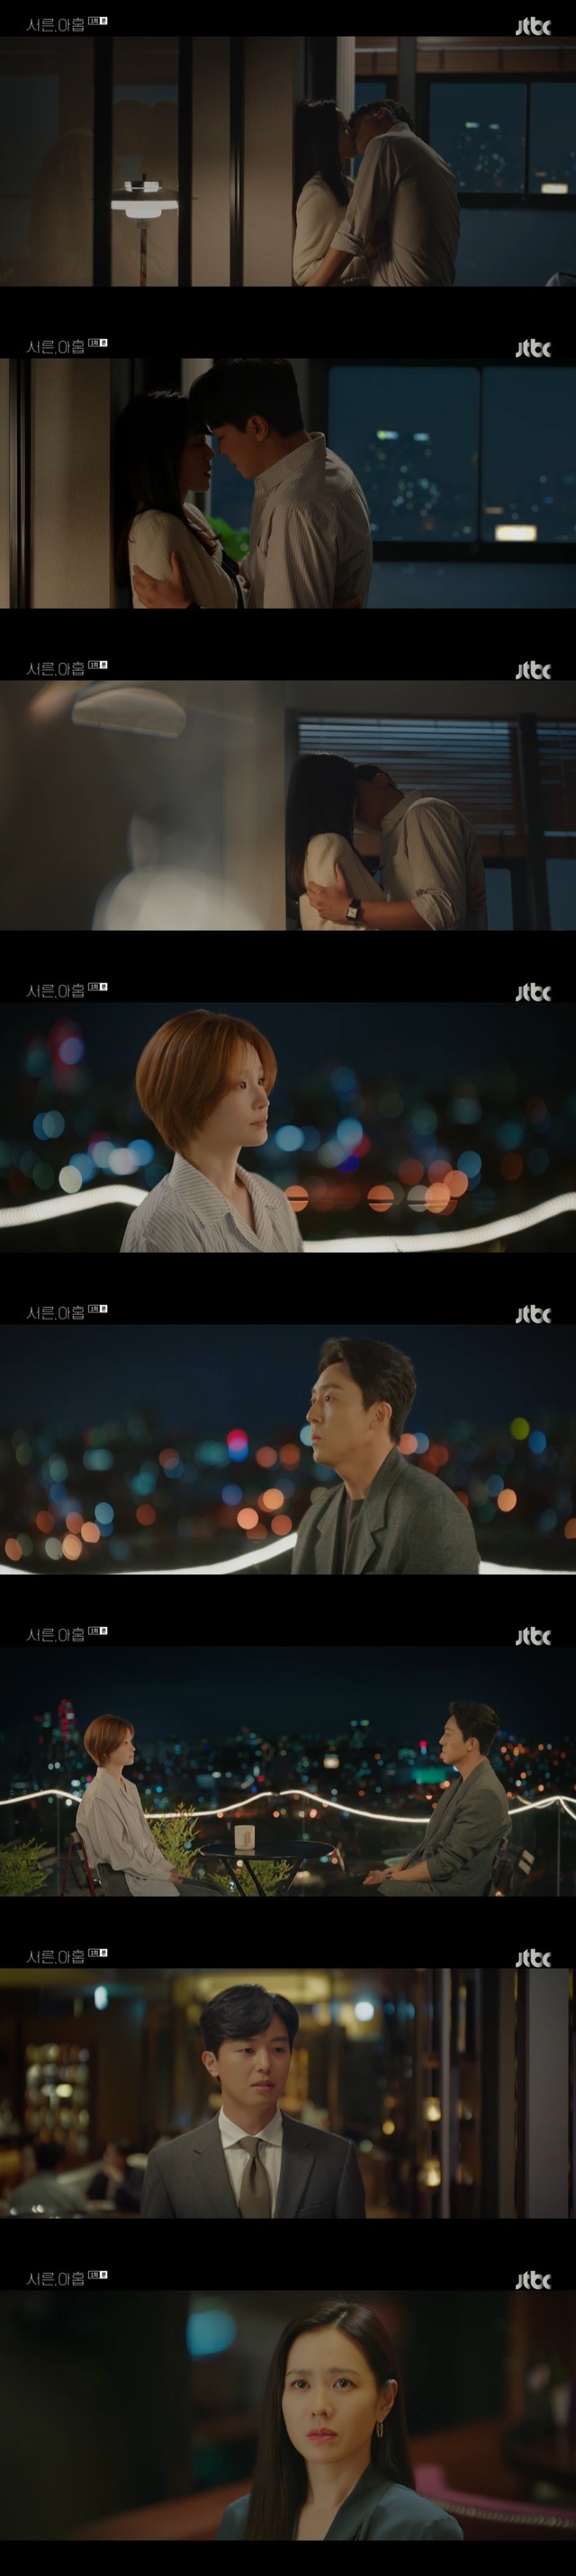 Son Ye-jin and Yeon Woo-jin broke up with The Slap after the One Nightstand bed, and Jeun Mi-do broke up with This is life.In the first episode of JTBCs Drama Thirty, Nine (playplayplay by Yoo Young-ah/director Kim Sang-ho), which was first broadcast on February 16, the love lines of Cha Mi-jo and Jeong Chan-young (played by Jeun Mi-do) were mixed.Cha Mi-jo (Son Ye-jin), Jeong Chan-young (Jeun Mi-do) and Jang Joo-hee (Kim Ji-hyun) met at 18 and turned 39.One of them, The Funeral, was drawn and opened the drama.The Funeral chapter was accompanied by three men, Sun-woo Kim (Yeon Woo-jin), Kim Jin-suk (This is life minutes), and Park Hyun-joon (Lee Tae-hwan), who hinted at the lover of three friends and added questions about who was dead.Then time went back and Chamijo went to work as a dermatologist.My sister Cha Mi-hyun (Kang Mal-geum) expressed dissatisfaction with Cha Mi-jos sabbatical plan and without hesitation, she mentioned adoptation and revealed her adoption of her brother Cha Mi-jo.Then, a group of aunts came to Chamijos hospital and Chamijos scuffle broke out. The aunts had the same name as the hospital, and they caught Misunderstood hair with Chamijo.Cha Mi-jo reminisced about Misunderstood and had a haircut in the past for Chung Chan-young.Twenty-one years ago, 18-year-old Chamijo first met Chung Chan-young on the subway, and Chung Chan-young fought with a fierce fight when he lent money to him, saying, I will help the poor.At that time, Chamijo met with Chung Chan-young by chance on his way to his mother.Chung Chan-young, who learned the story, accompanied Cha Mi-jo to get the money back, and the relationship between the three people began when he met with his real daughter Jang Joo-hee, who was a real friend of Cha Mi-jo.Soon Cha Mi-Jos Guardian sister Cha Mi-hyun came to the police station and revealed her love for her brother, and Kim Jin-suk came to Chung Chan-youngs Guardian.Cha Mi-jo told Chung Chan-young that Kim Jin-suk had a wife, saying, I have been in your affair. Chung Chan-young told Kim Jin-suk that he would have been married if I went to study abroad.Chamijo went to the Onnuri nursery school volunteer activity where he lived with Friend Chung Chan-young and Jang Joo-hee and met Sun-woo Kim who taught children English.Chamijo left his watch at the nursery, and Sun-woo Kim took charge of the wristwatch delivery.Cha Mi-jo waited for Sun-woo Kim while drinking with Chung Chan-young and Jang Joo-hee and presented a pajama flower with a watch.Sun-woo Kim was shaken by Chamijos Confessions that he lived in a nursery while eating with Chamijo.Cha Mi-jo told Chung Chan-young, Jang Joo-hee, that he plans to go to United States of America during the sabbatical and asked Chung to end his affair with Kim Jin-suk.Chung Chan-young promised Cha Mi-jo, I never slept with my brother. Stop talking about affair. He promised, I will go.The next day, Chung went to Kim Jin-suks company and hurriedly avoided his position when he met Kim Jin-suks wife, Kang Sun-ju (Song Min-ji).Jang Joo-hee first passed by the store where he was preparing to open his business and met with his boss Park Hyun-joon.Park Hyun-joon quit the hotel chef and opened a Chinese restaurant in Chinatown, and Sun-woo Kim showed friendship by helping Park Hyun-joon prepare for opening.Sun-woo Kim then went to see Rachmaninoff, and his promise was canceled and he was watching the performance alone and Chamijo and The Slap.Sun-woo Kim had a beer with Chamijo and had Confessions that his brother was adopted from the nursery and suggested, Would you like to go see the pills?When Chamijo was embarrassed, saying, Lets meet for the second time and go home together? Sun-woo Kim replied, I have seen it from the nursery.When Chamijo asked, You want to sleep with me now? Sun-woo Kim replied, Yes.Chamijo went to Sun-woo Kims house and made love, and Sun-woo Kim refused to go to United States of America soon after asking for a movie date.